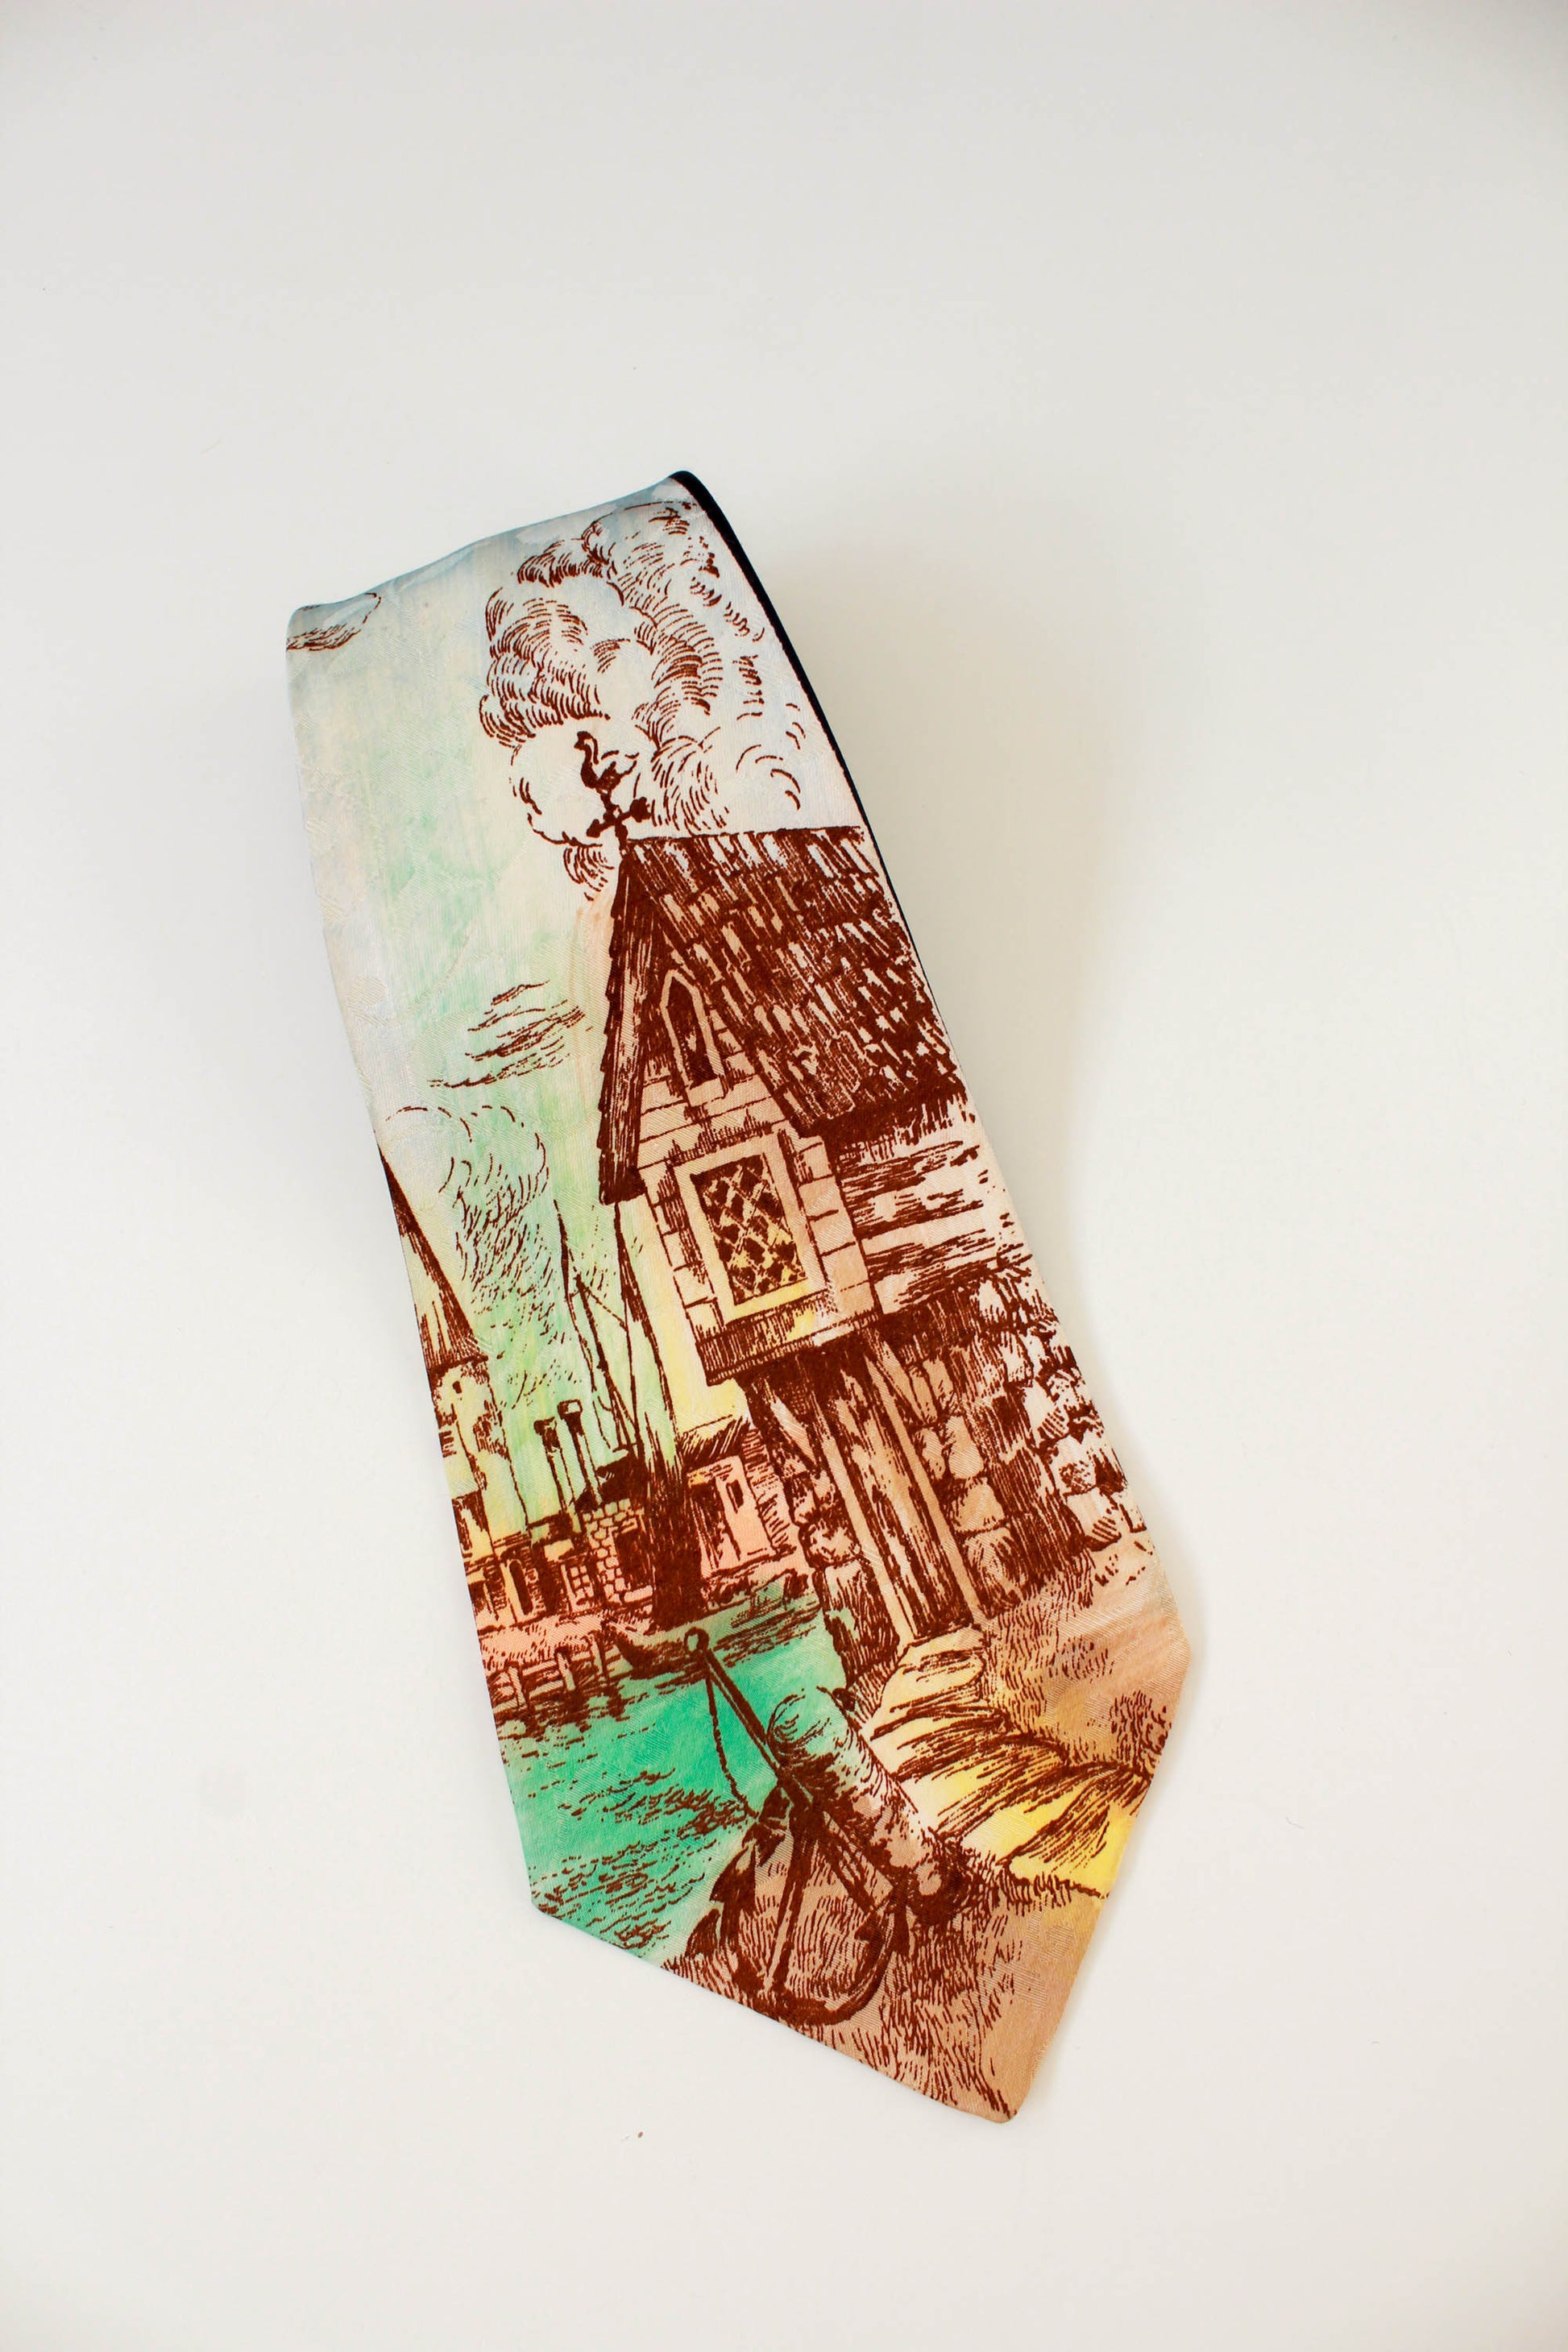 1940s rayon wide swing tie with hand painted house illustration, delmar creation vintage tie jacquard